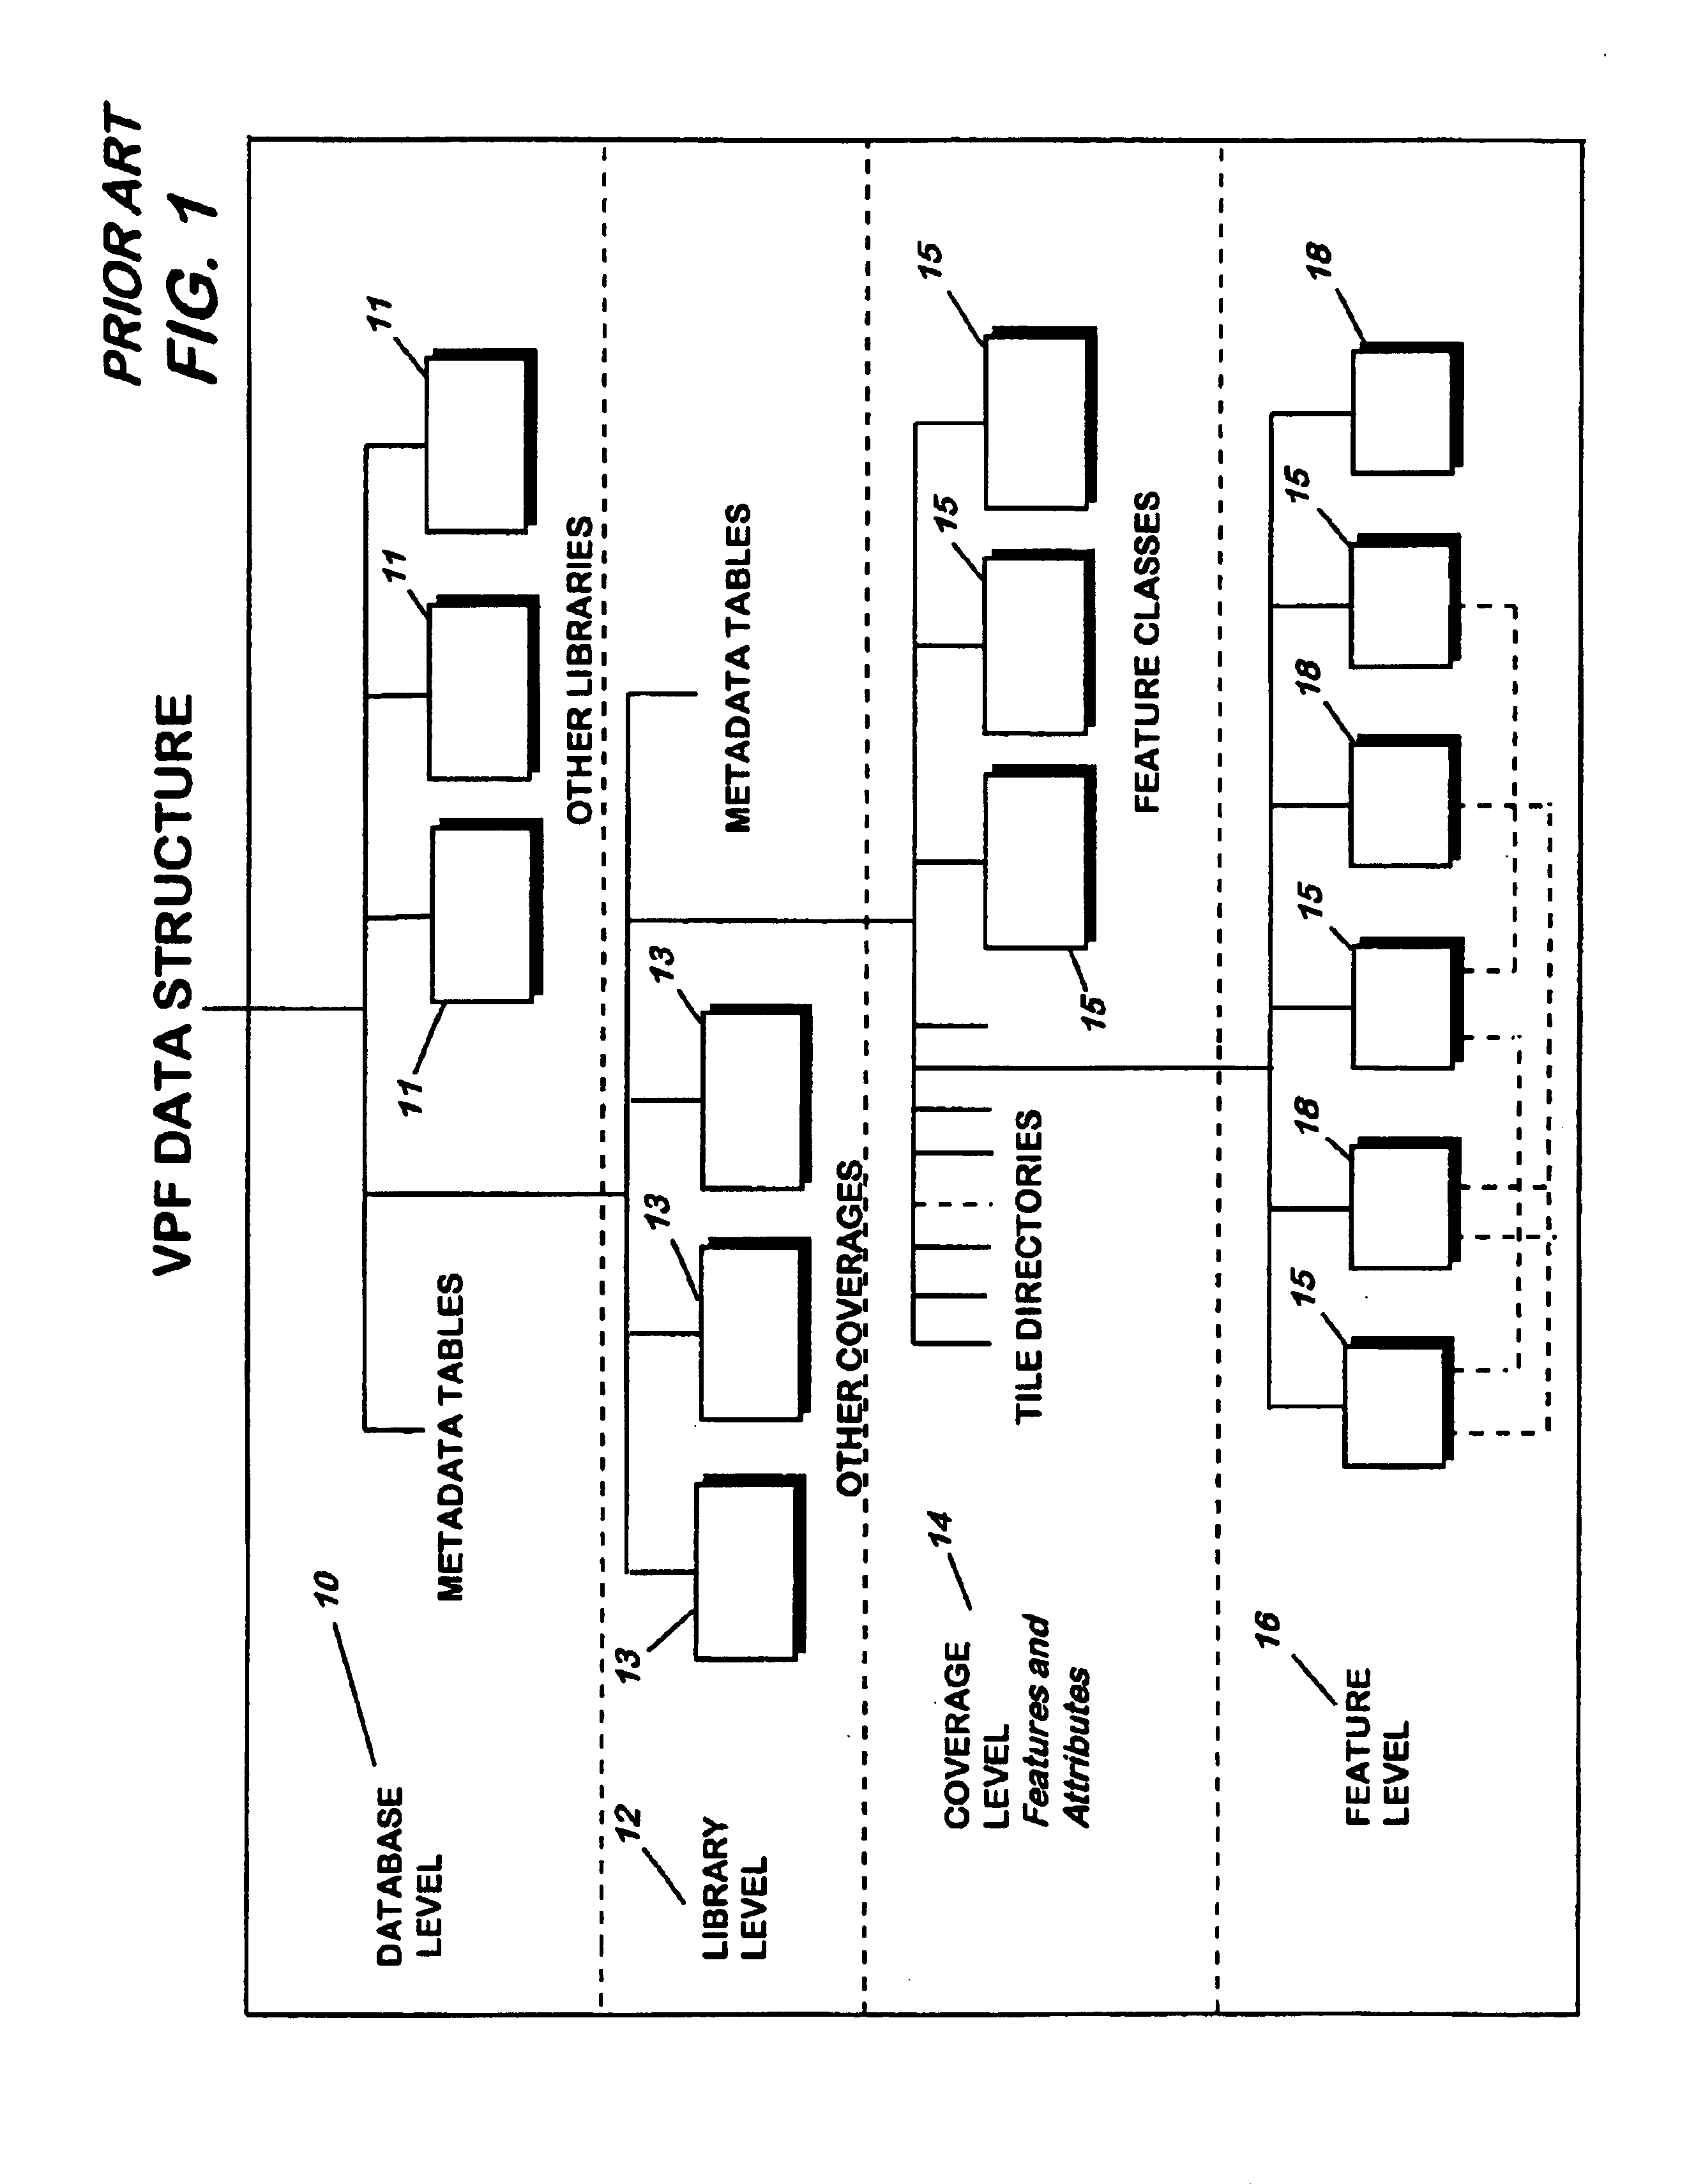 Method and apparatus for building and maintaining an object-oriented geospatial database